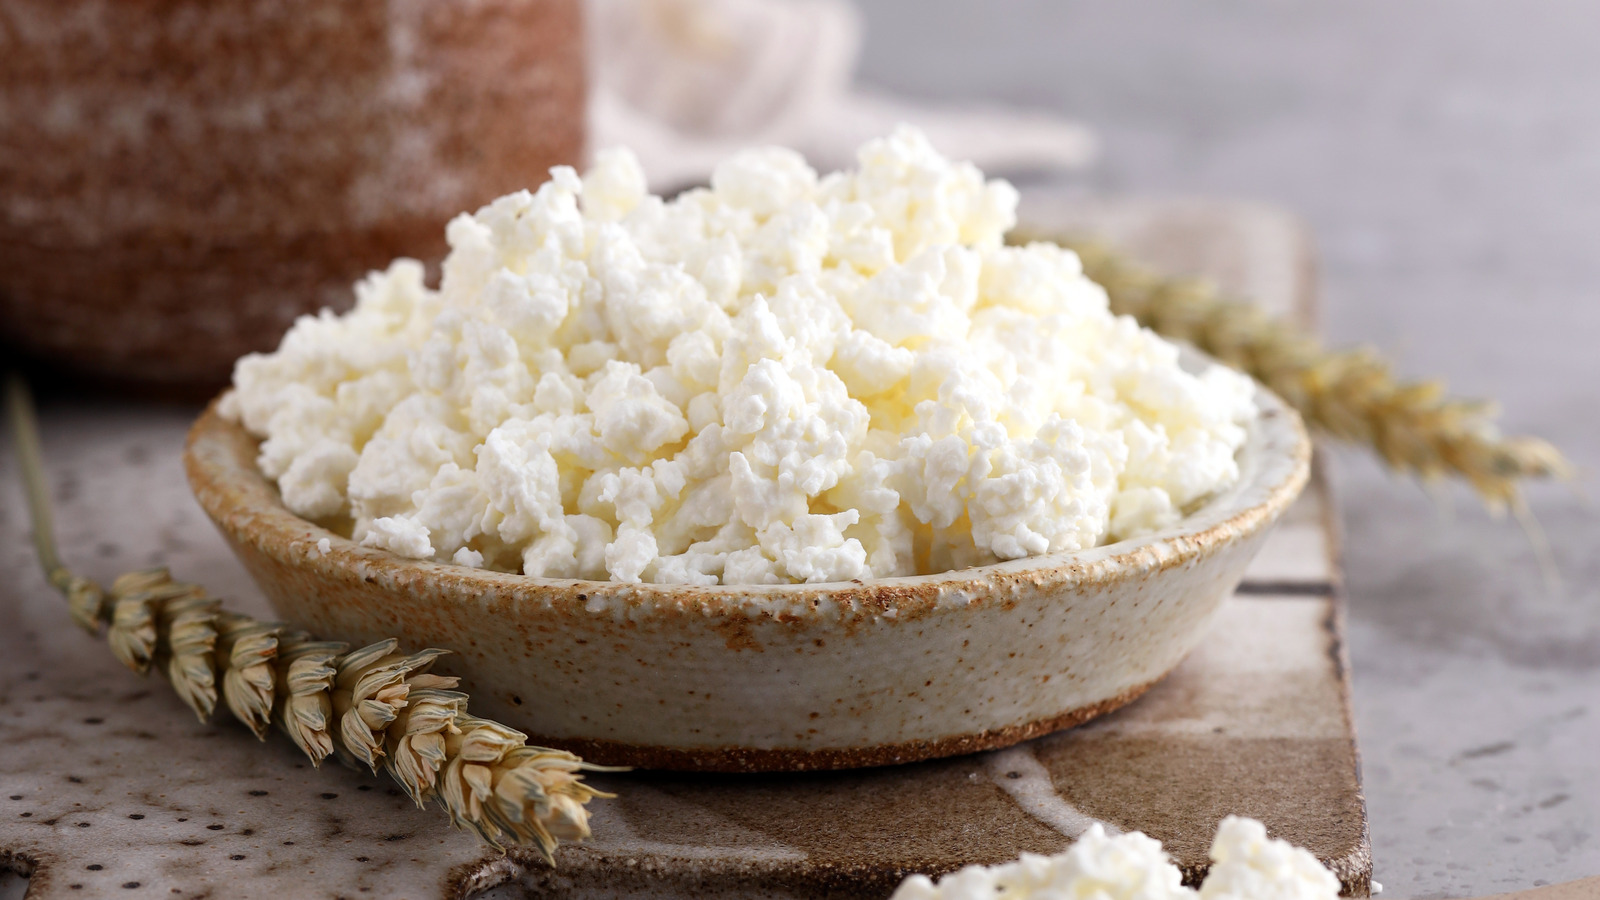 Cottage Cheese Is Making a Comeback—What to Know About This Trend